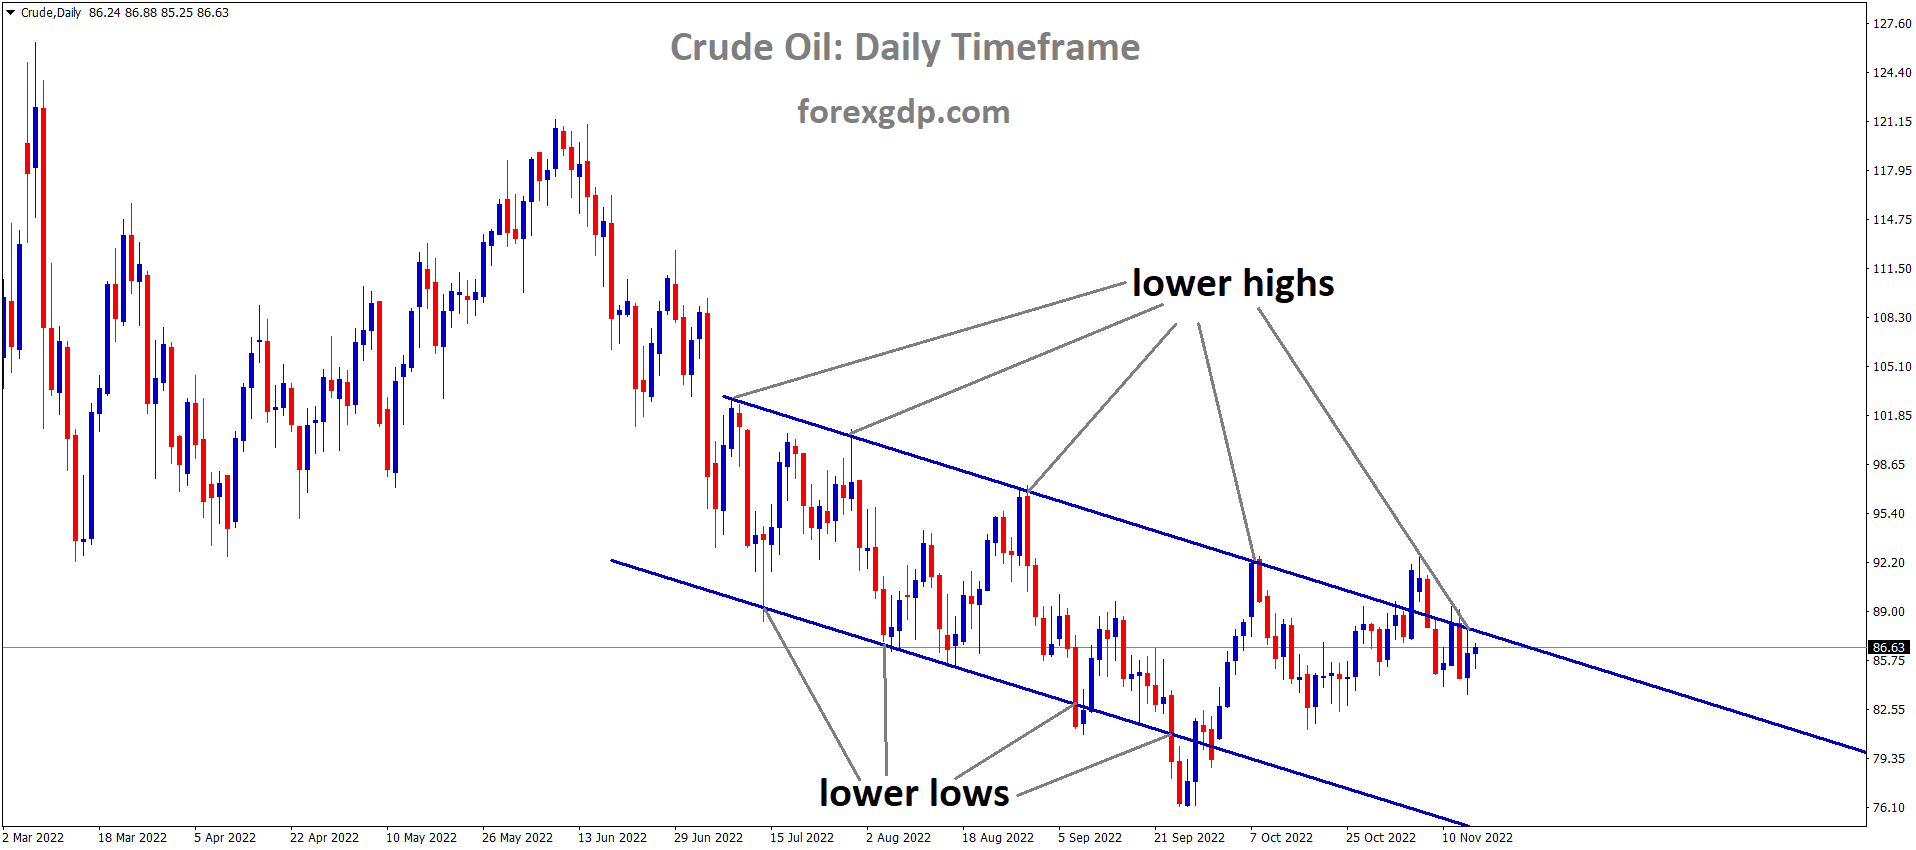 Crude oil is moving in the Descending channel and the market has reached the lower high area of the channel 1